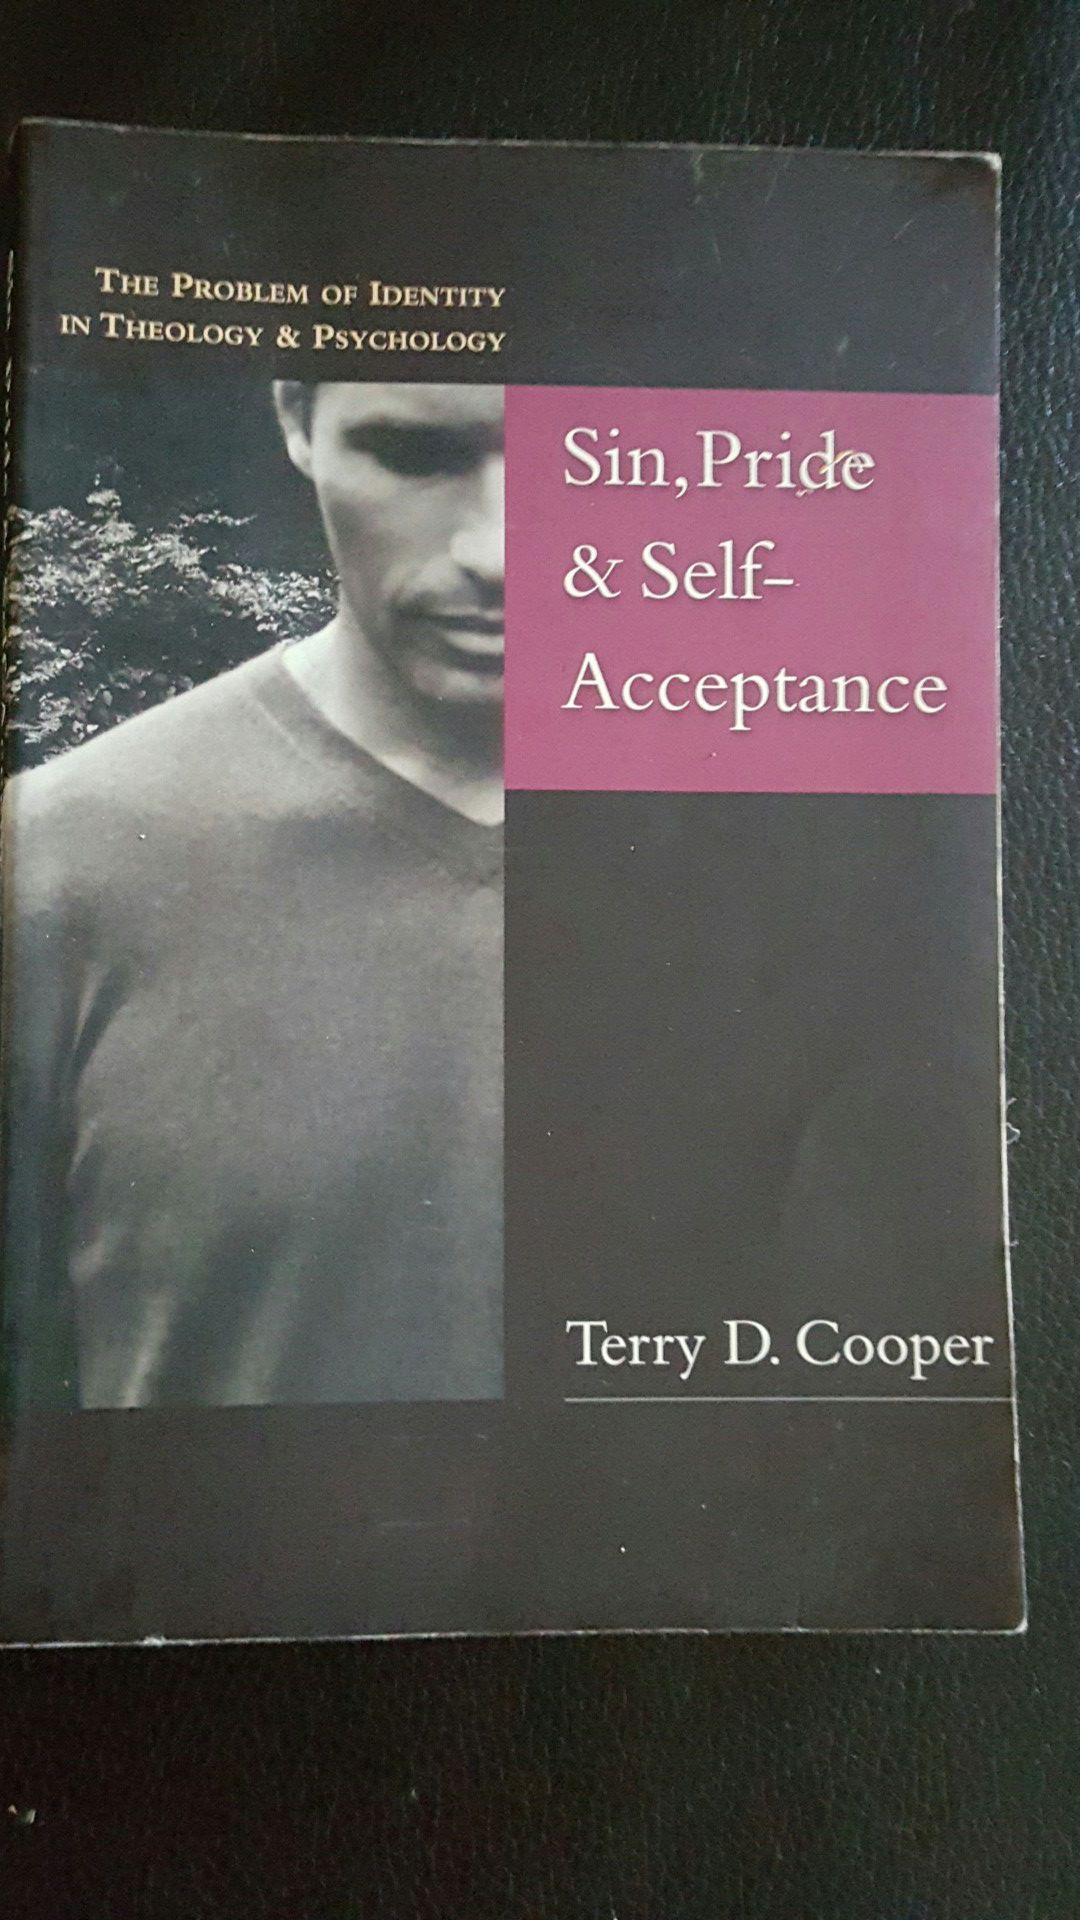 SIN,PRIDE & SELF ACCEPTANCE BY TERRY D. COOPER